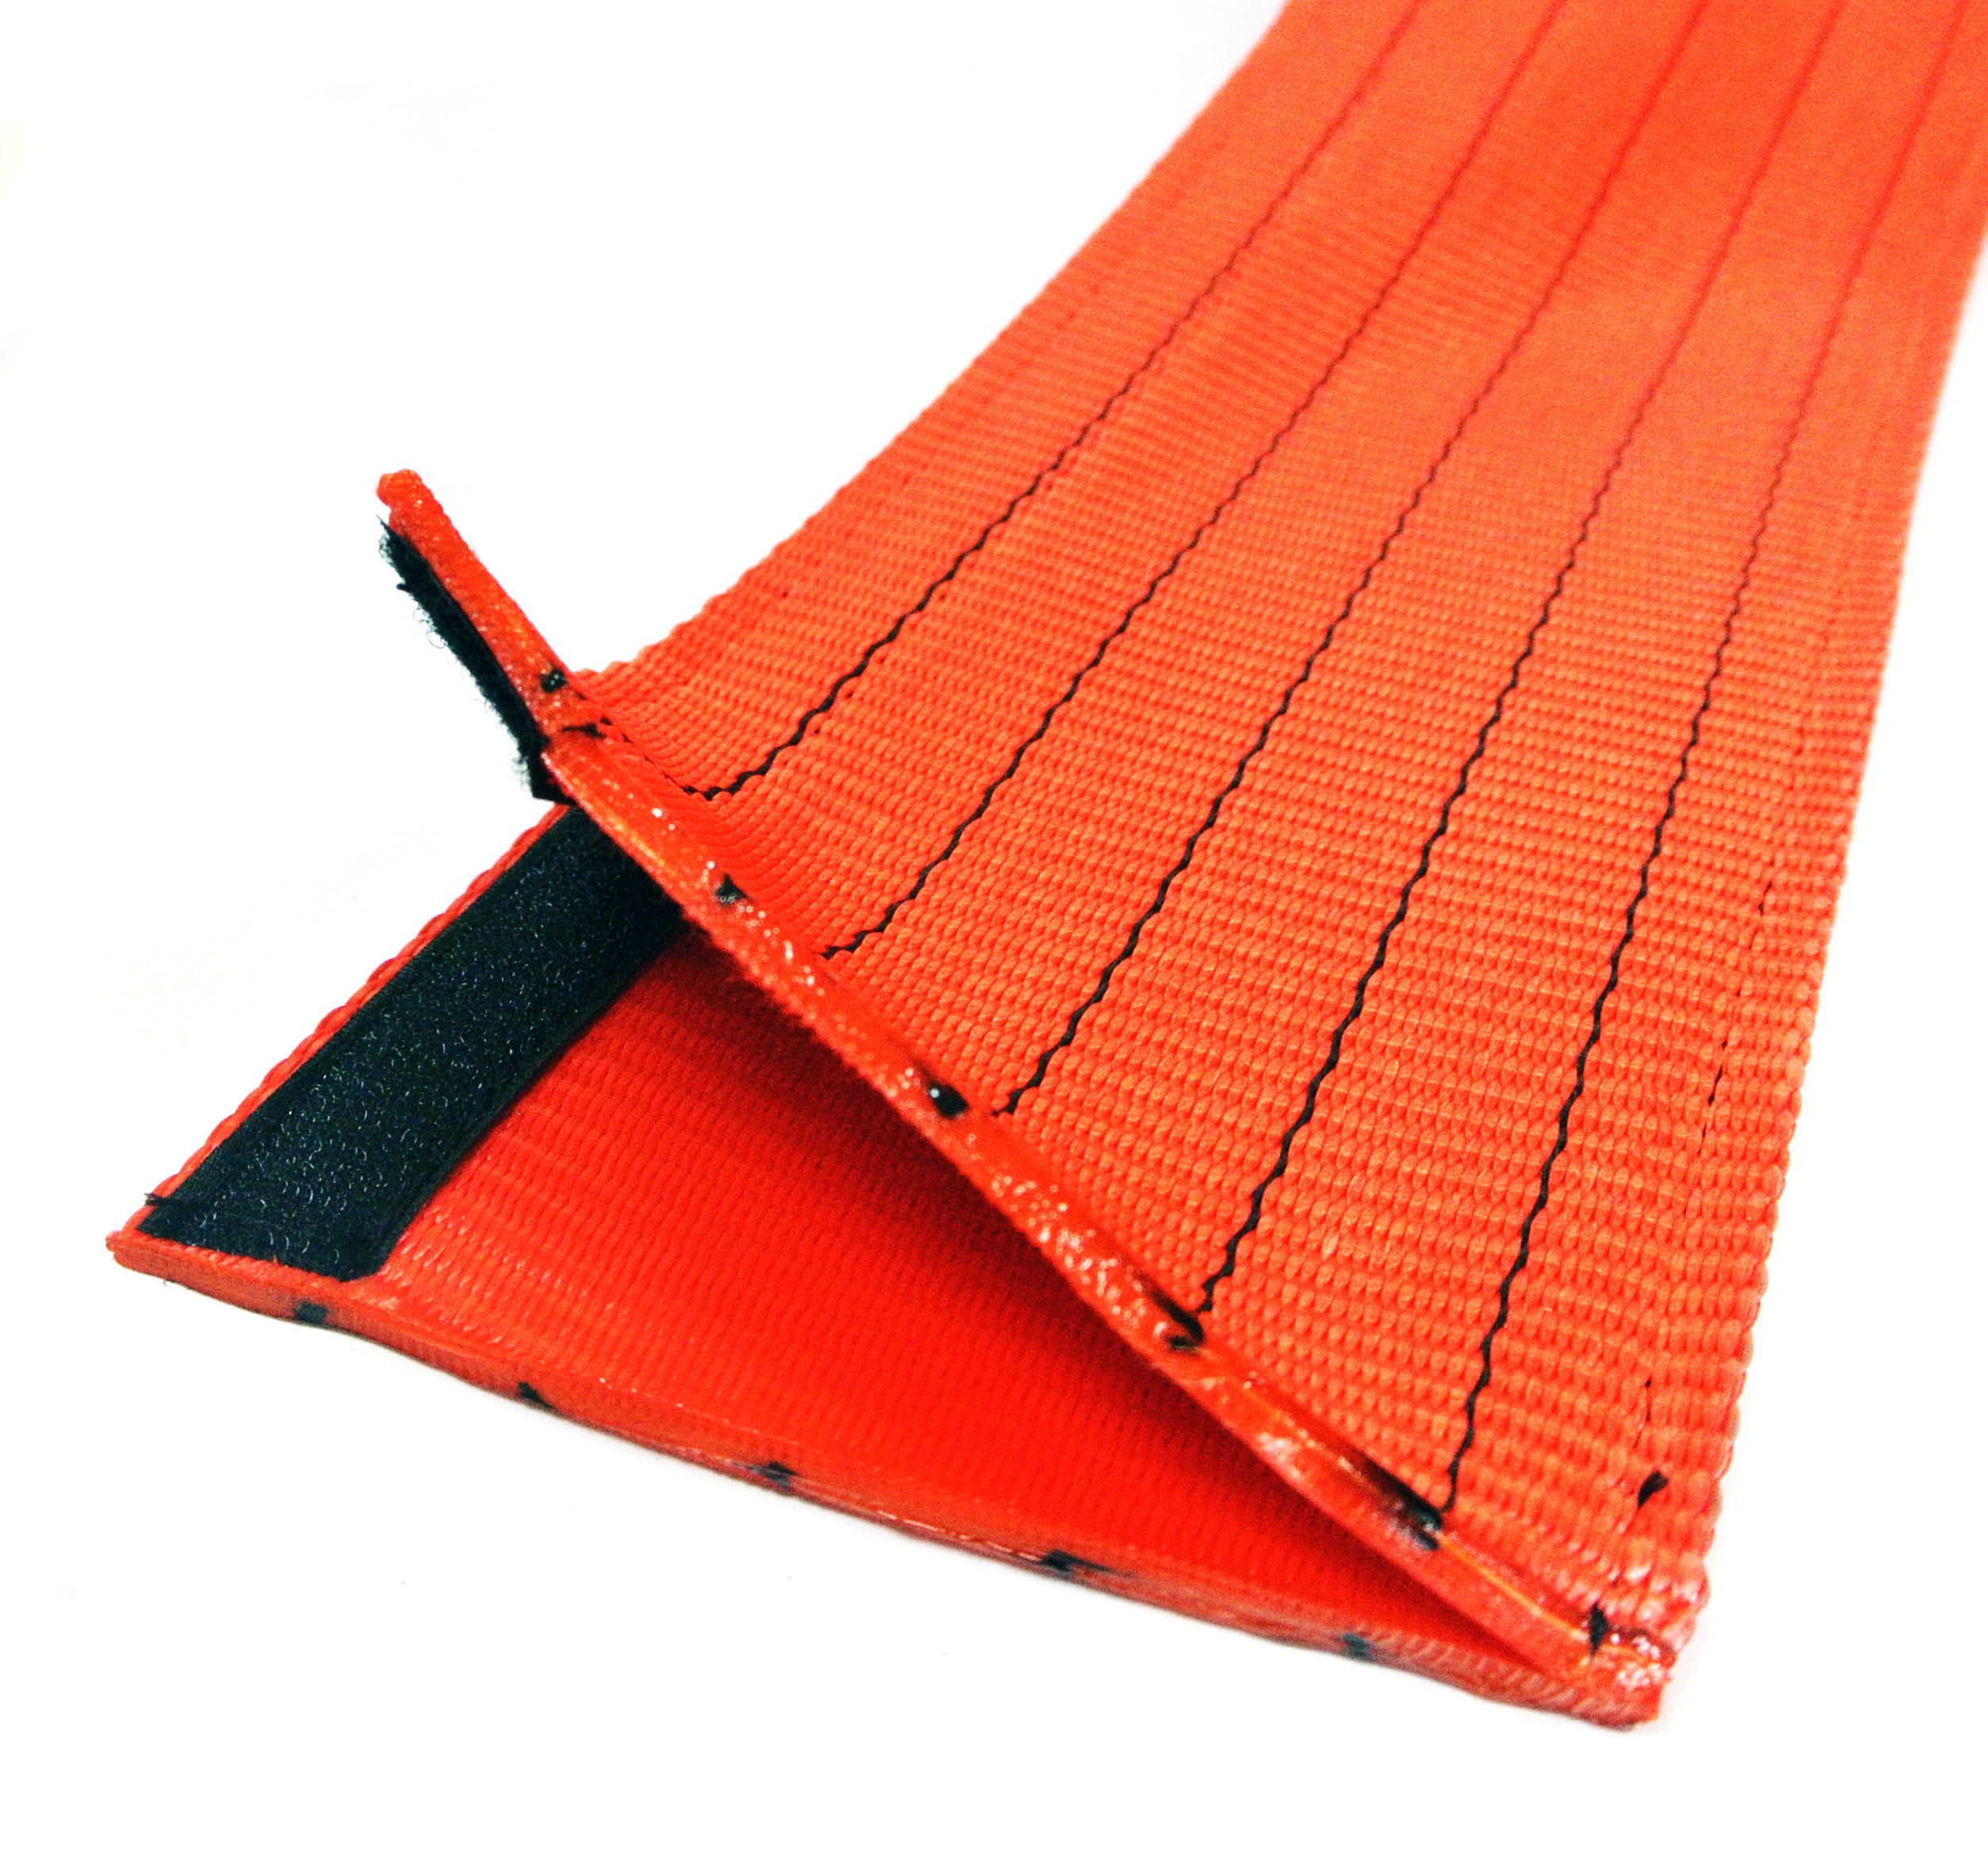 Red 75mm wear band for webbing or sling